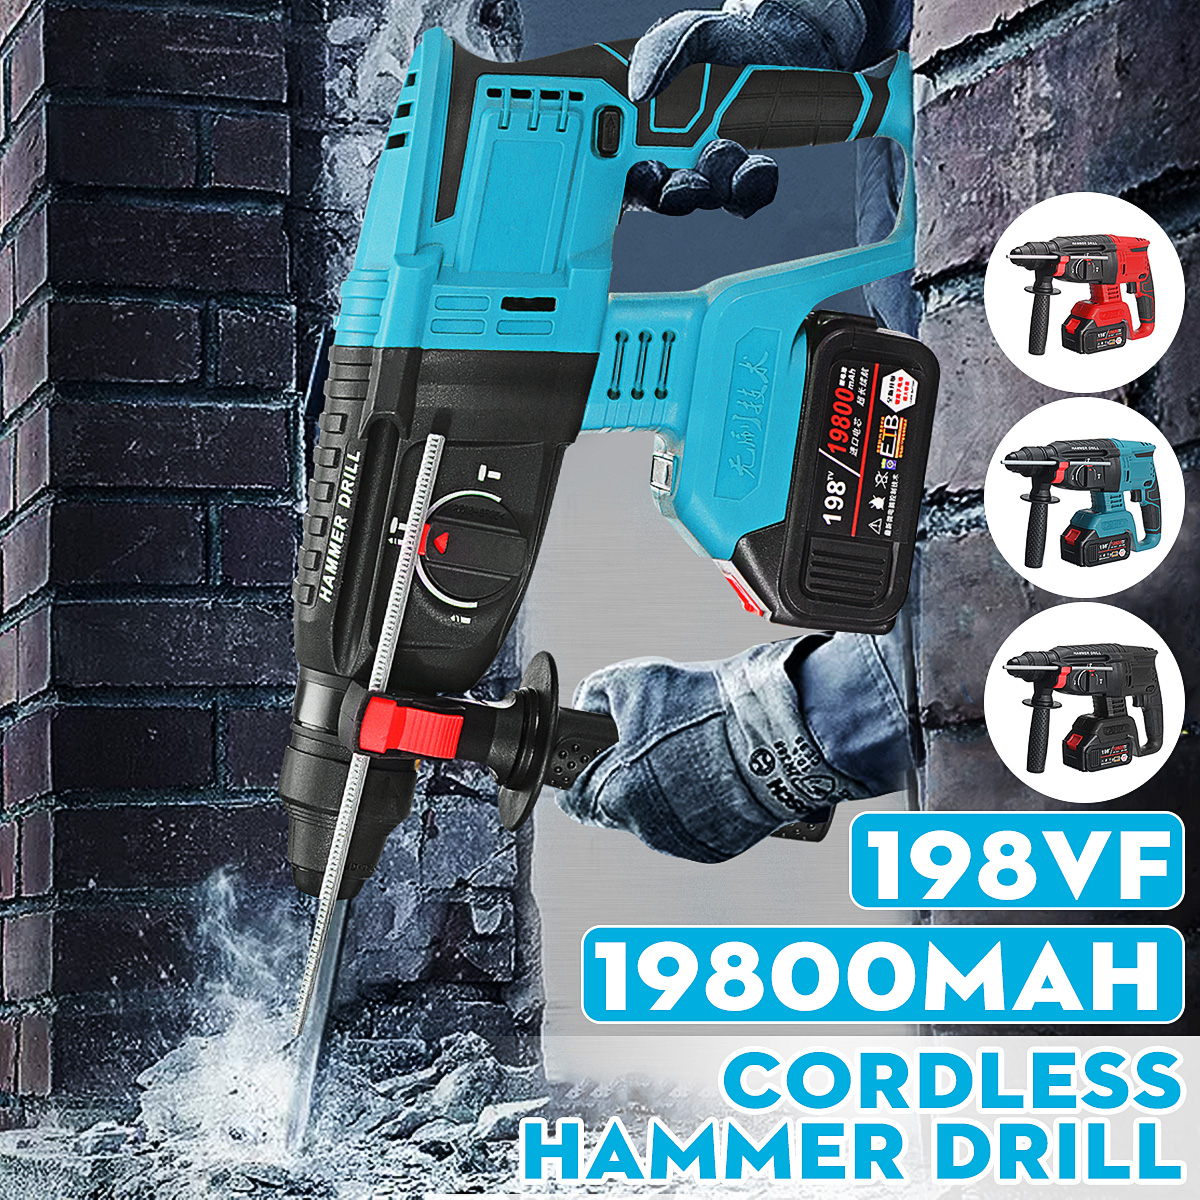 100-240V-21V-Brushless-Electric-Hammer-Heavy-Duty-Electric-Rotary-Hammer-Drill-No-load-Speed-Tool-1744302-1